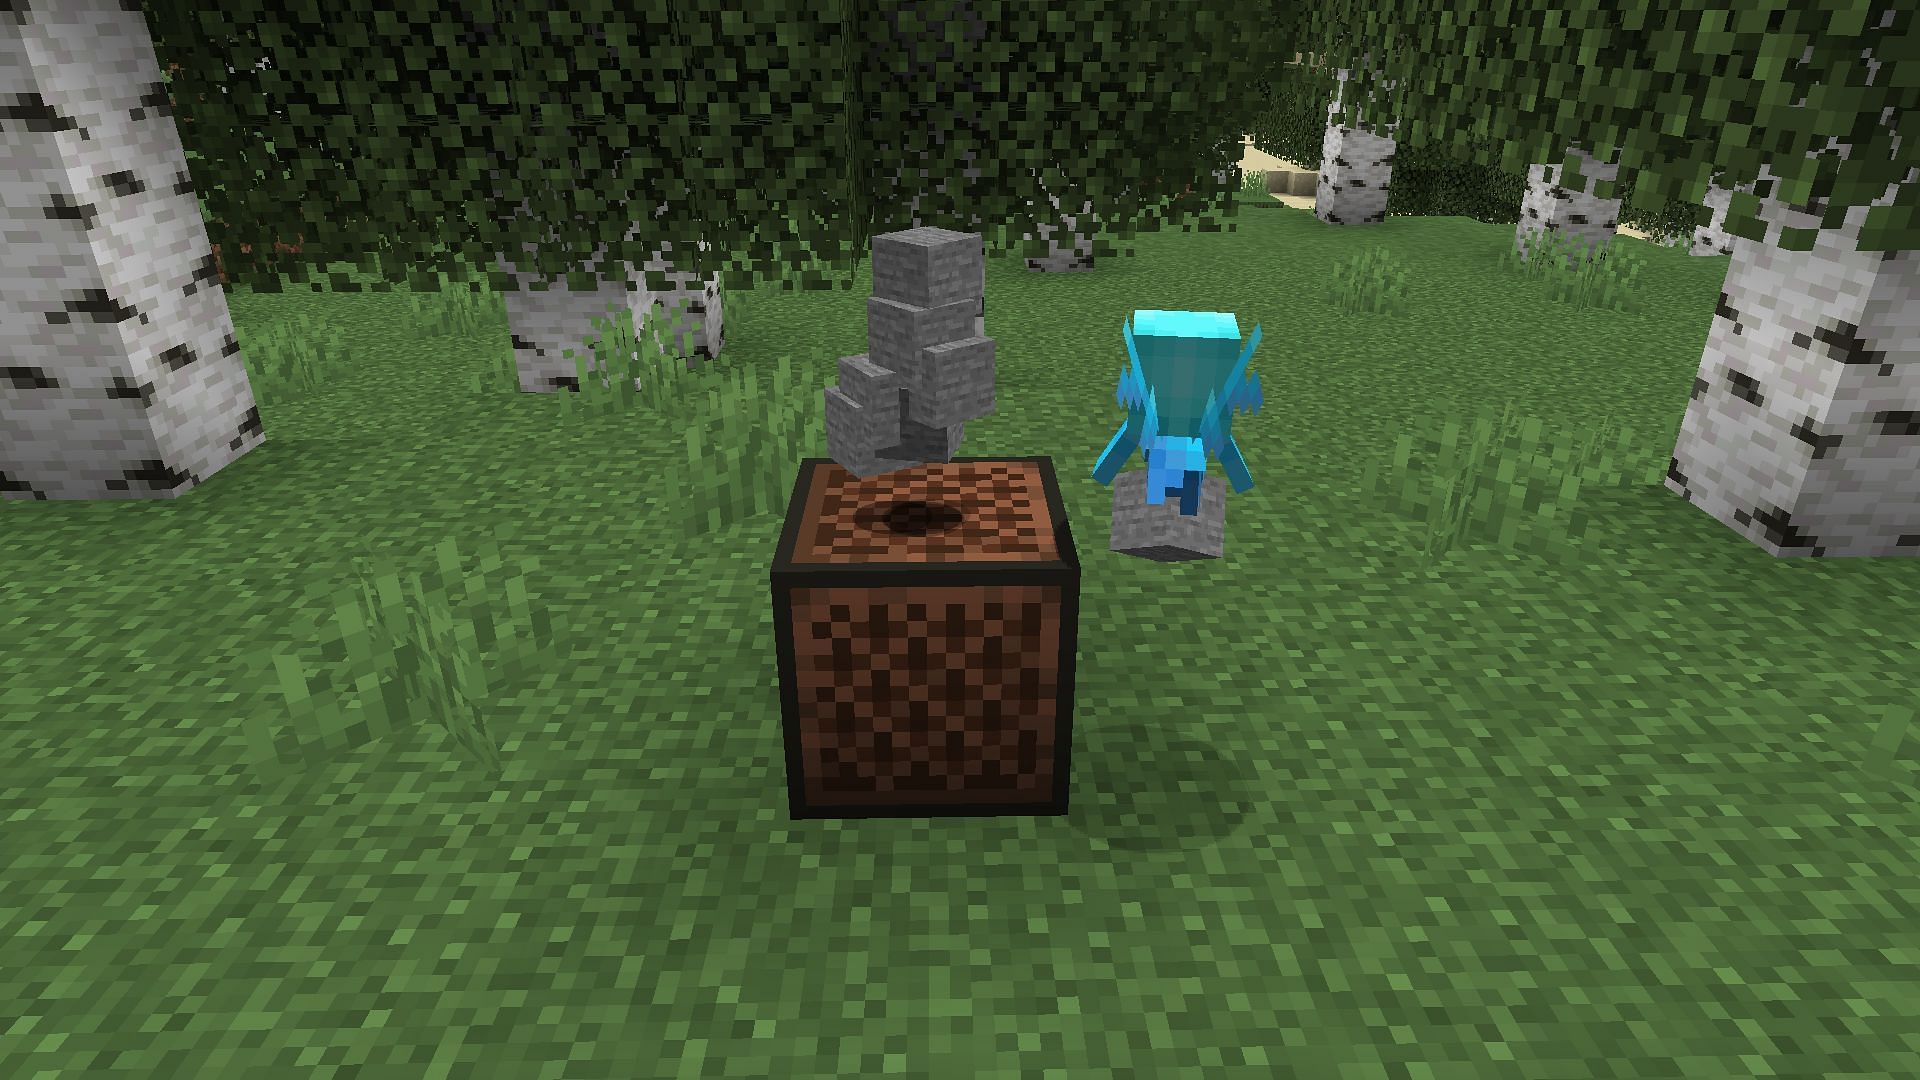 The mob throwing items near a note block (Image via Minecraft)